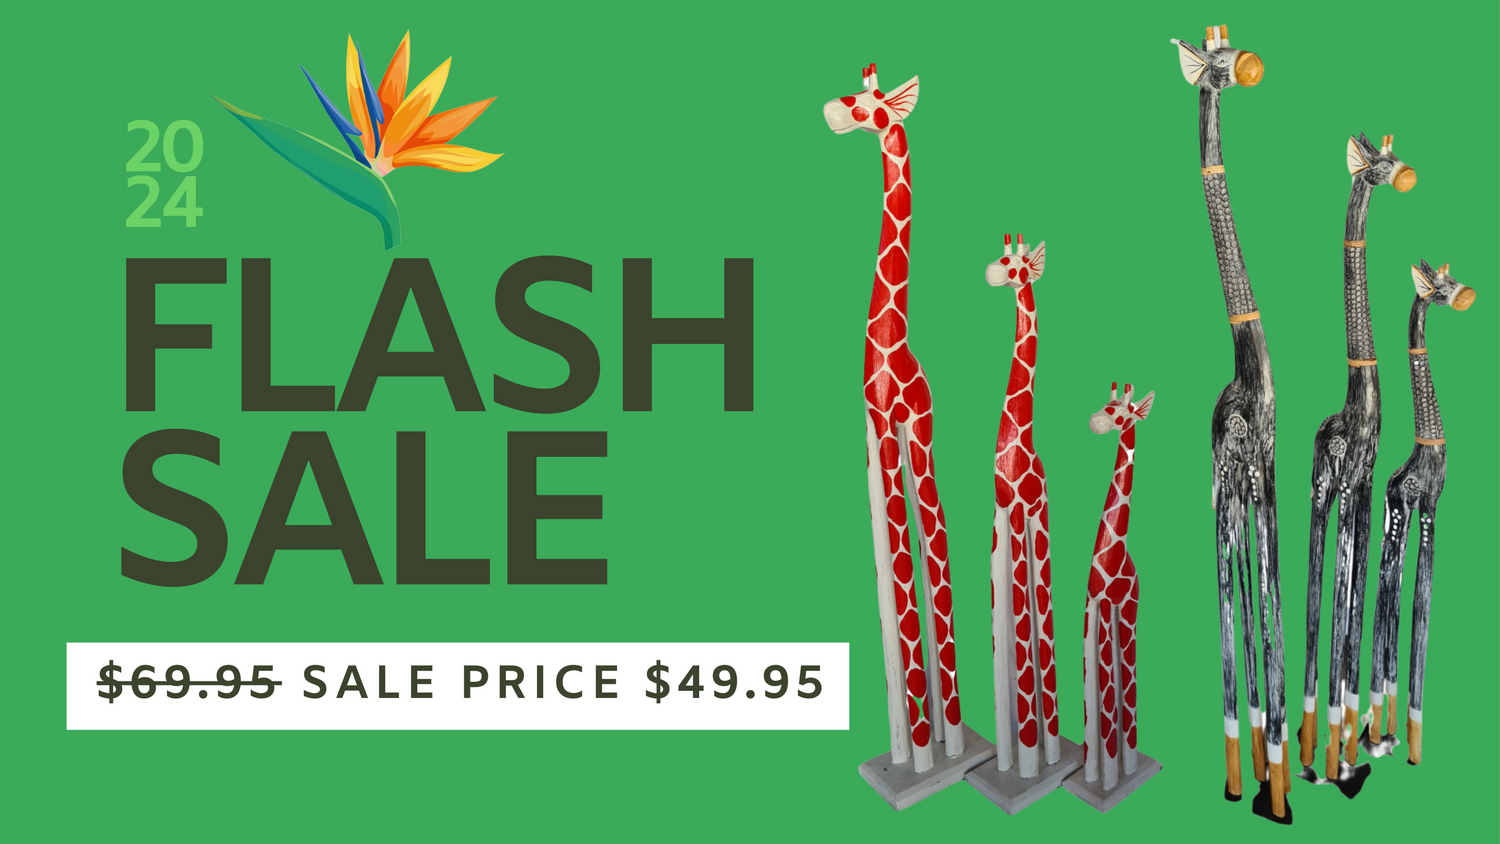 Balinese Hand Carved Wooden Giraffes Flash Sale, on NOW!